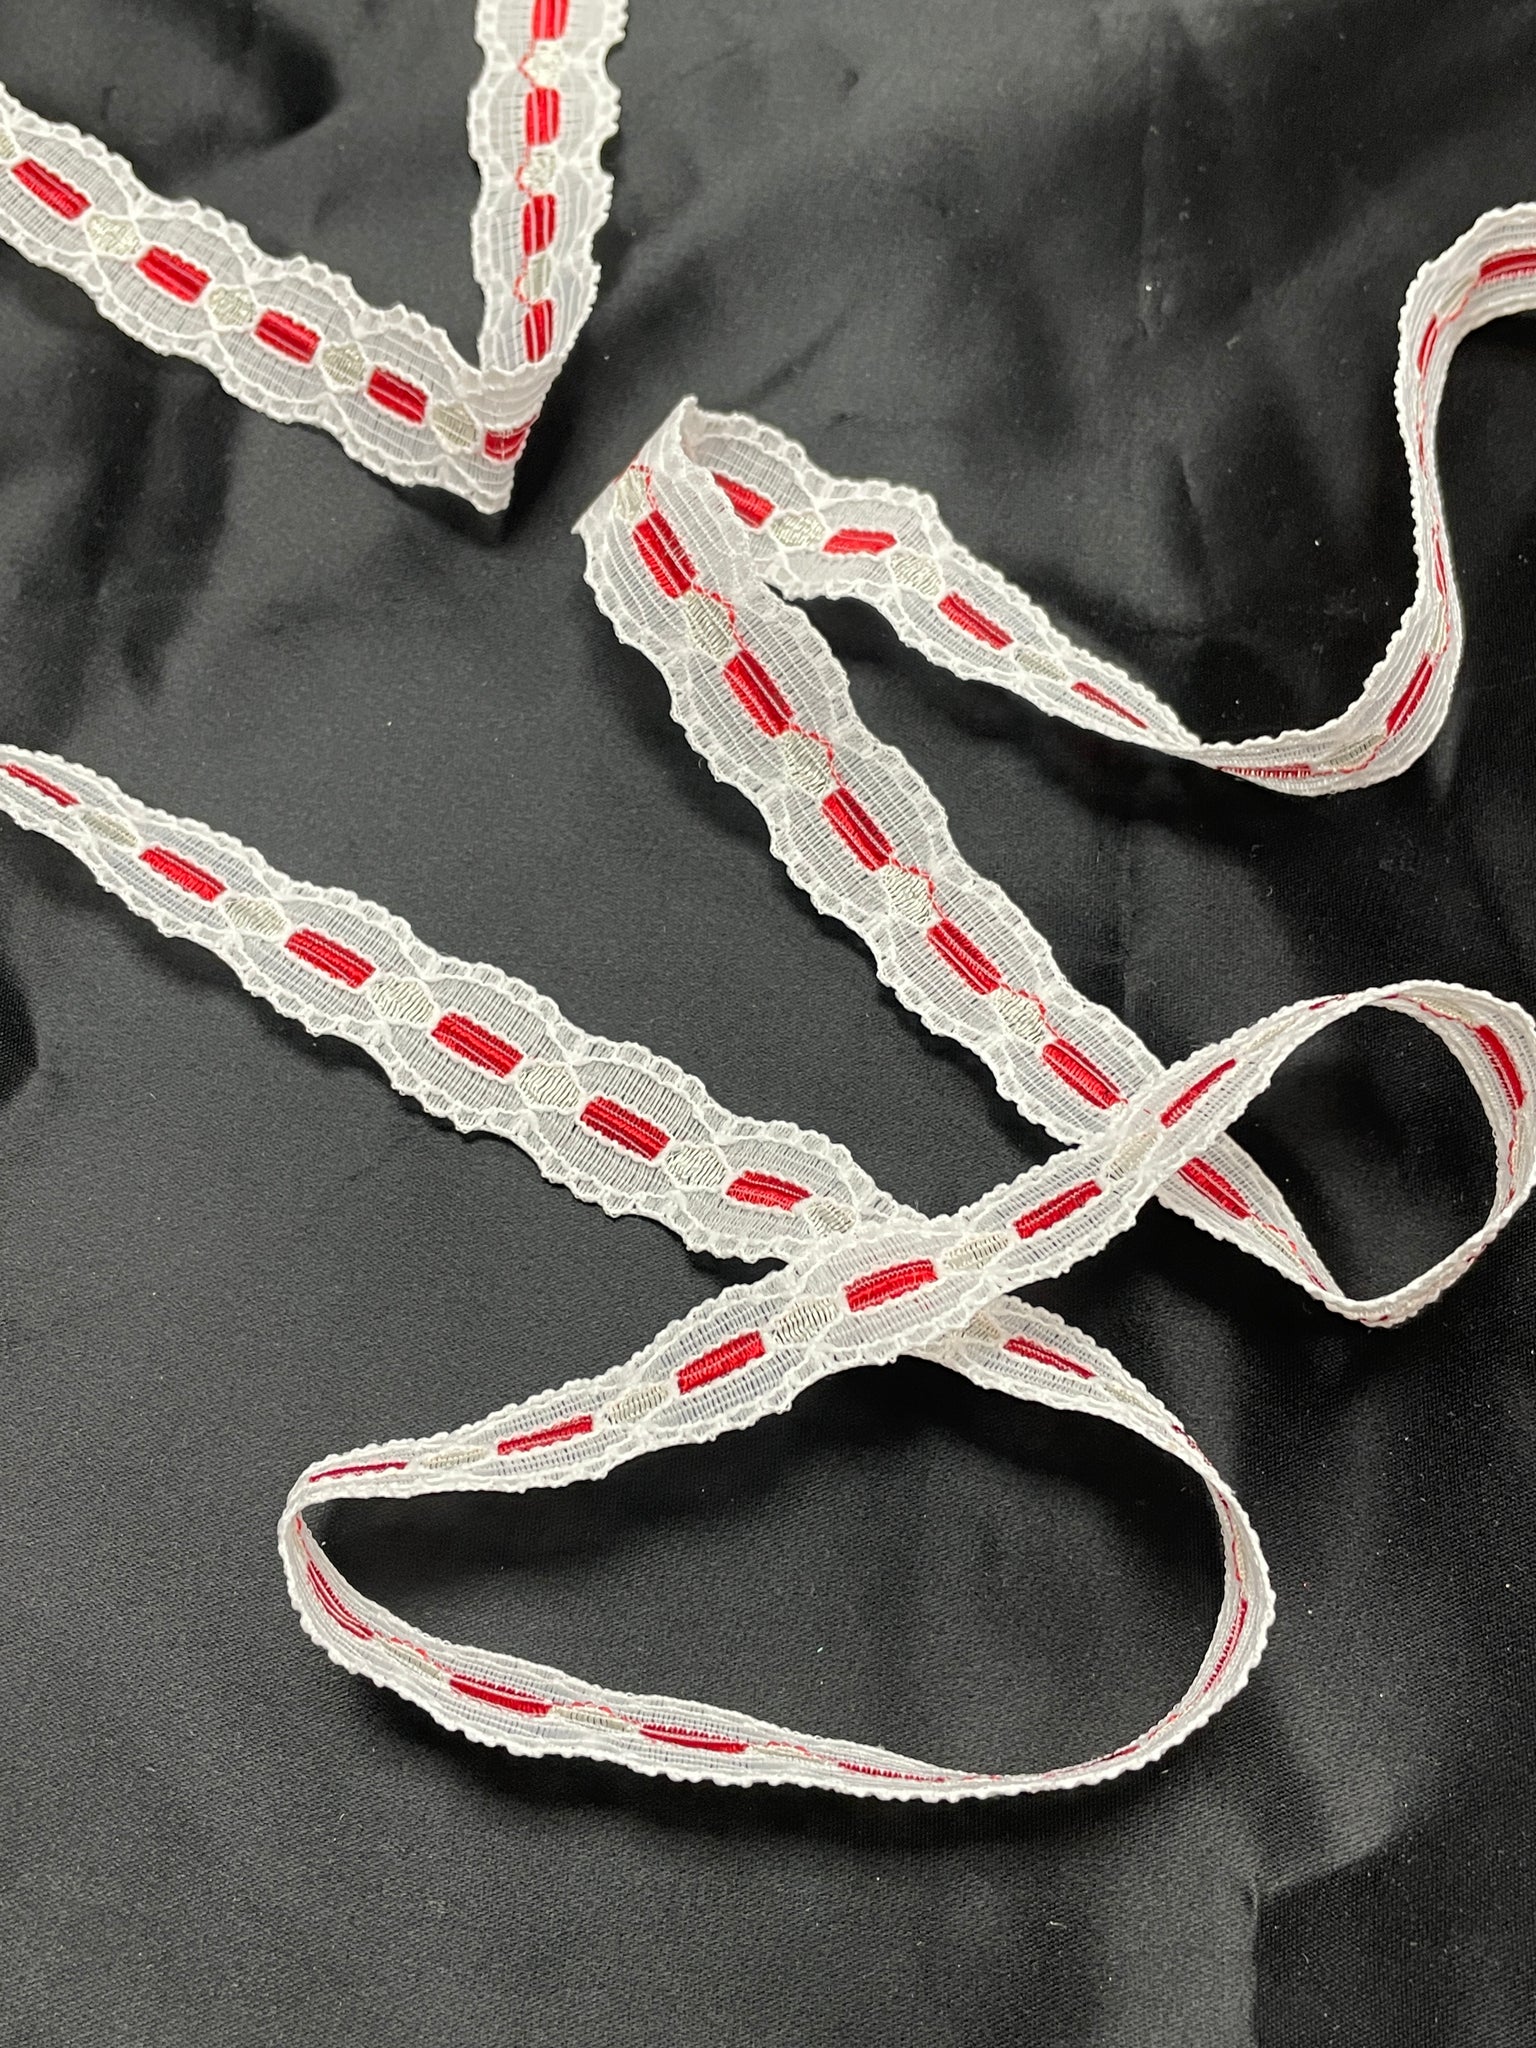 1 5/8 YD Polyester Lace Trim Vintage - White with Red Faux Insertion